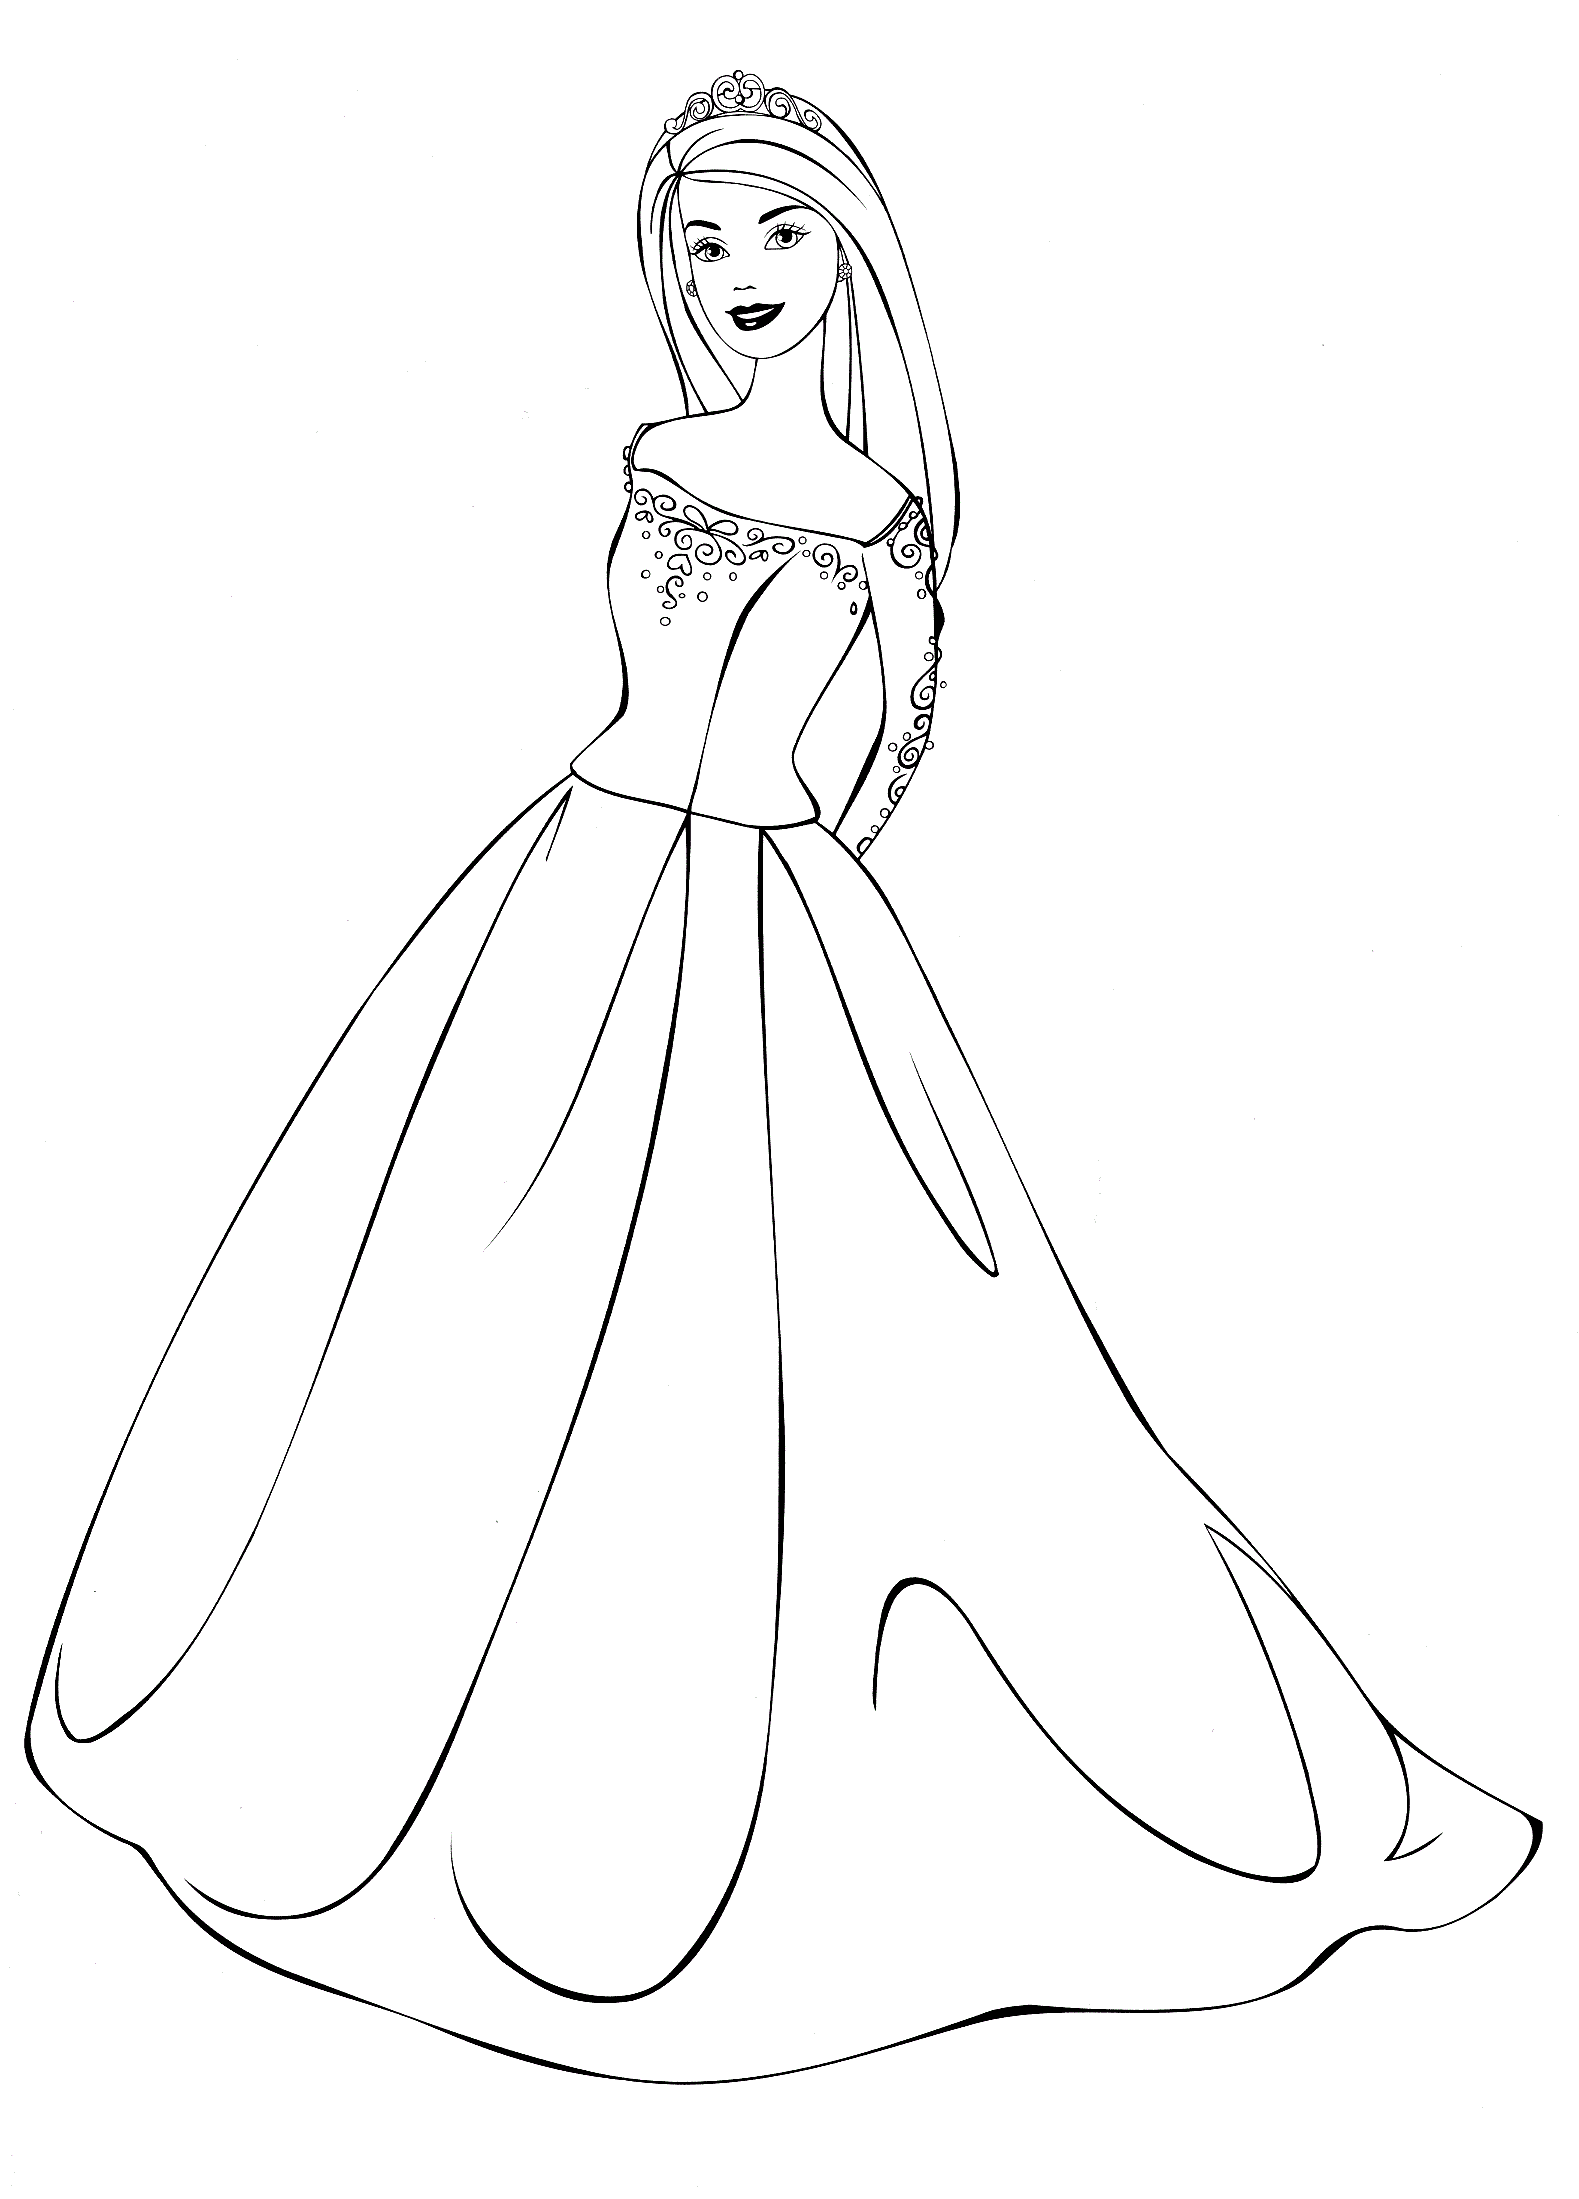 Princess Barbie in a wedding dress - Coloring pages for you